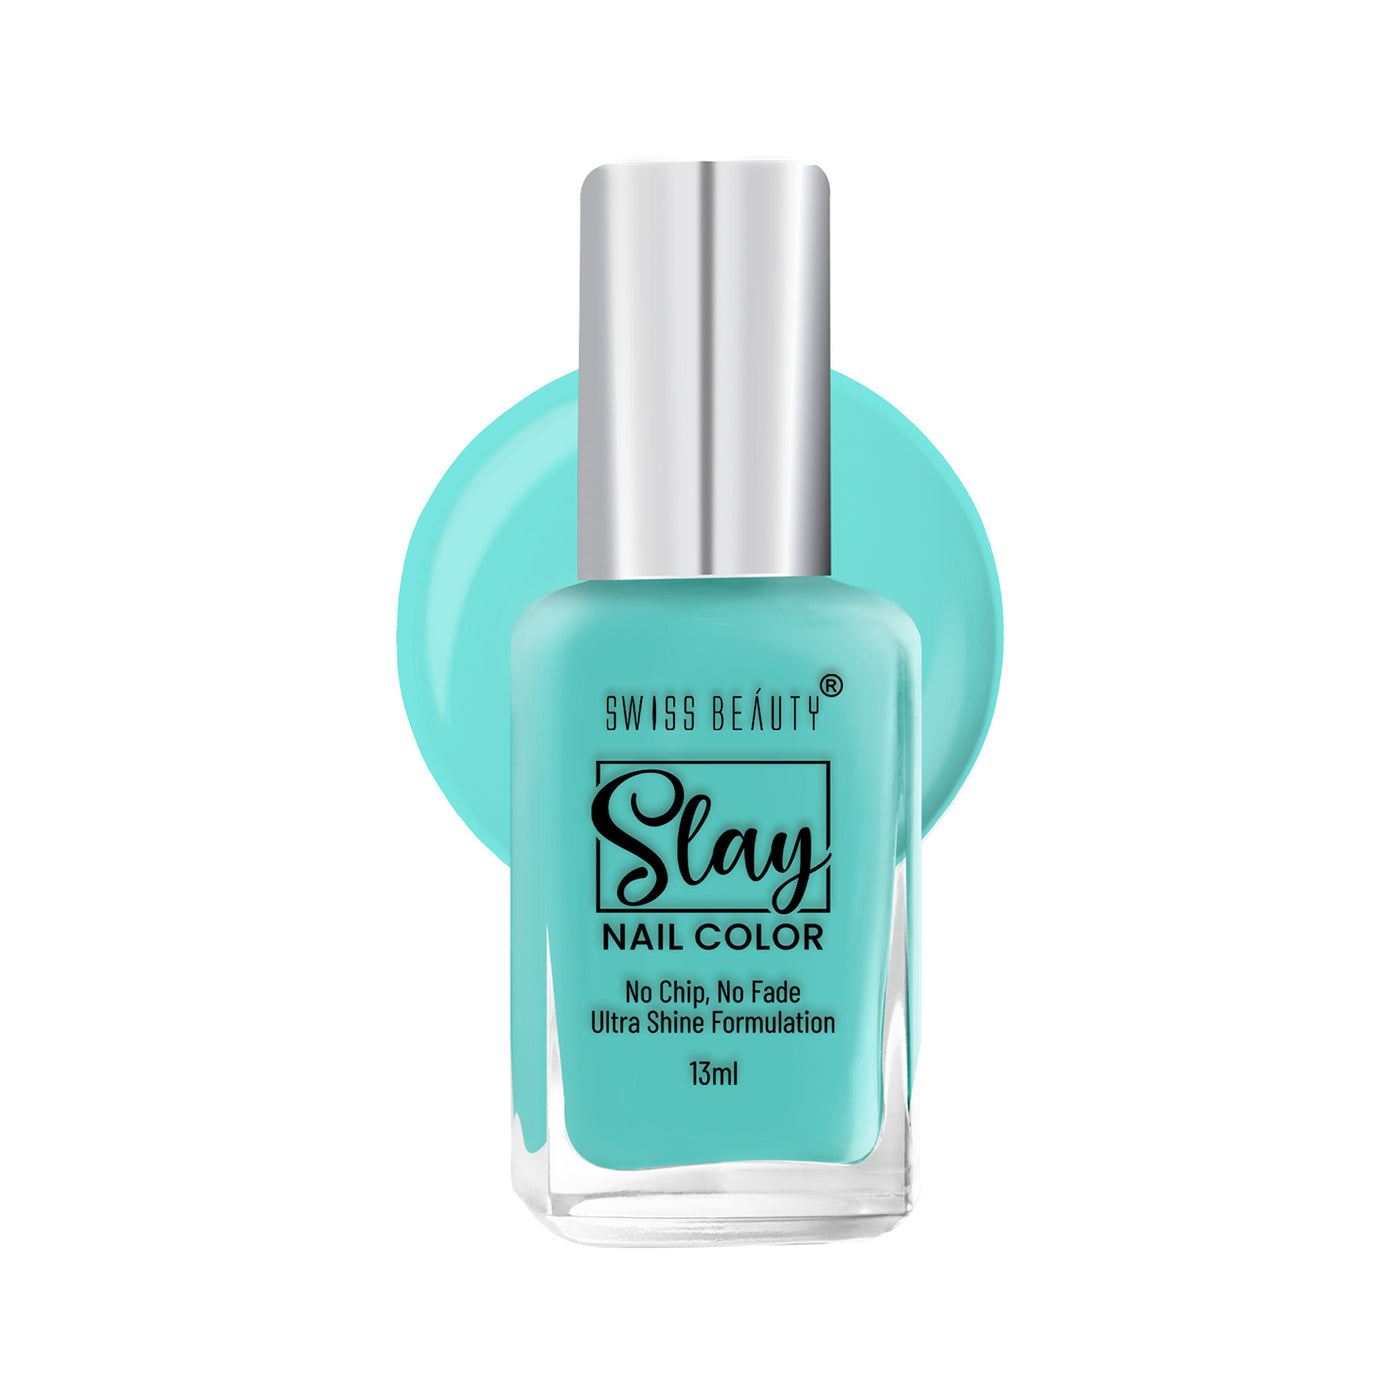 Best Teal Nail Polish For A Pretty Blue-Green Manicure